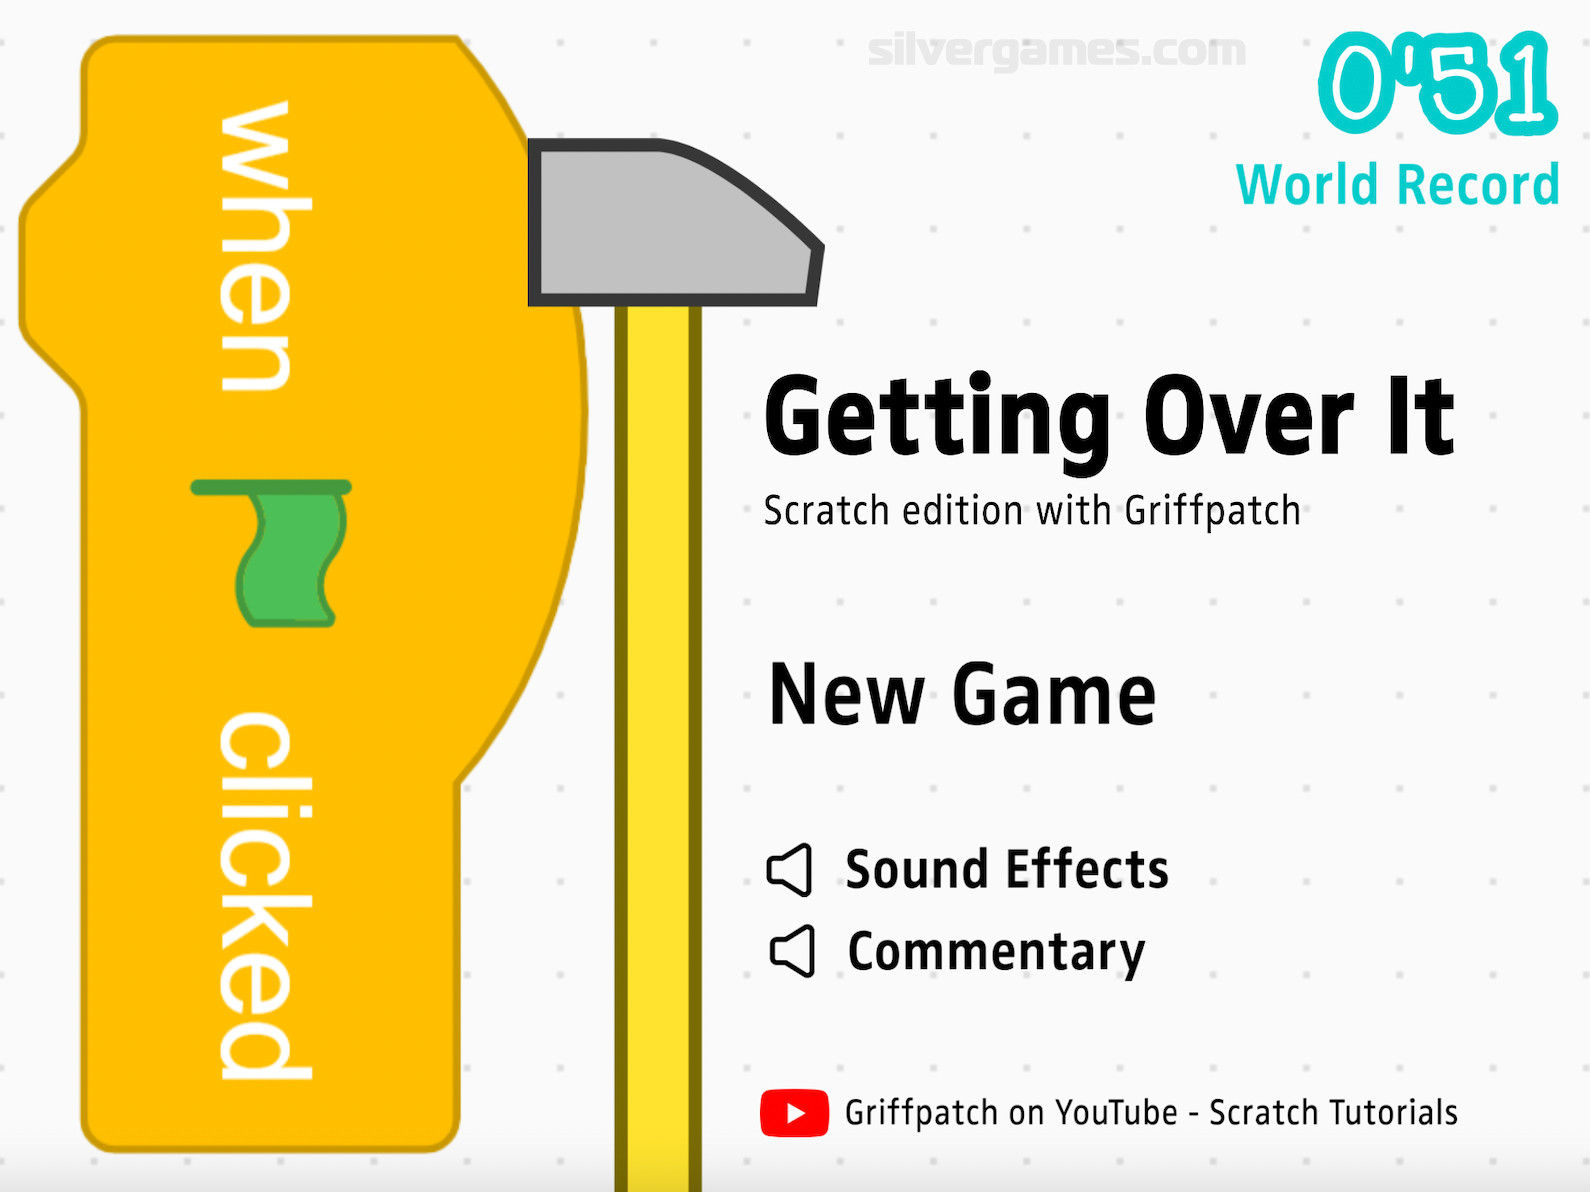 CAN I COMPLETE THIS GAME ??  GETTING OVER IT LIVE 